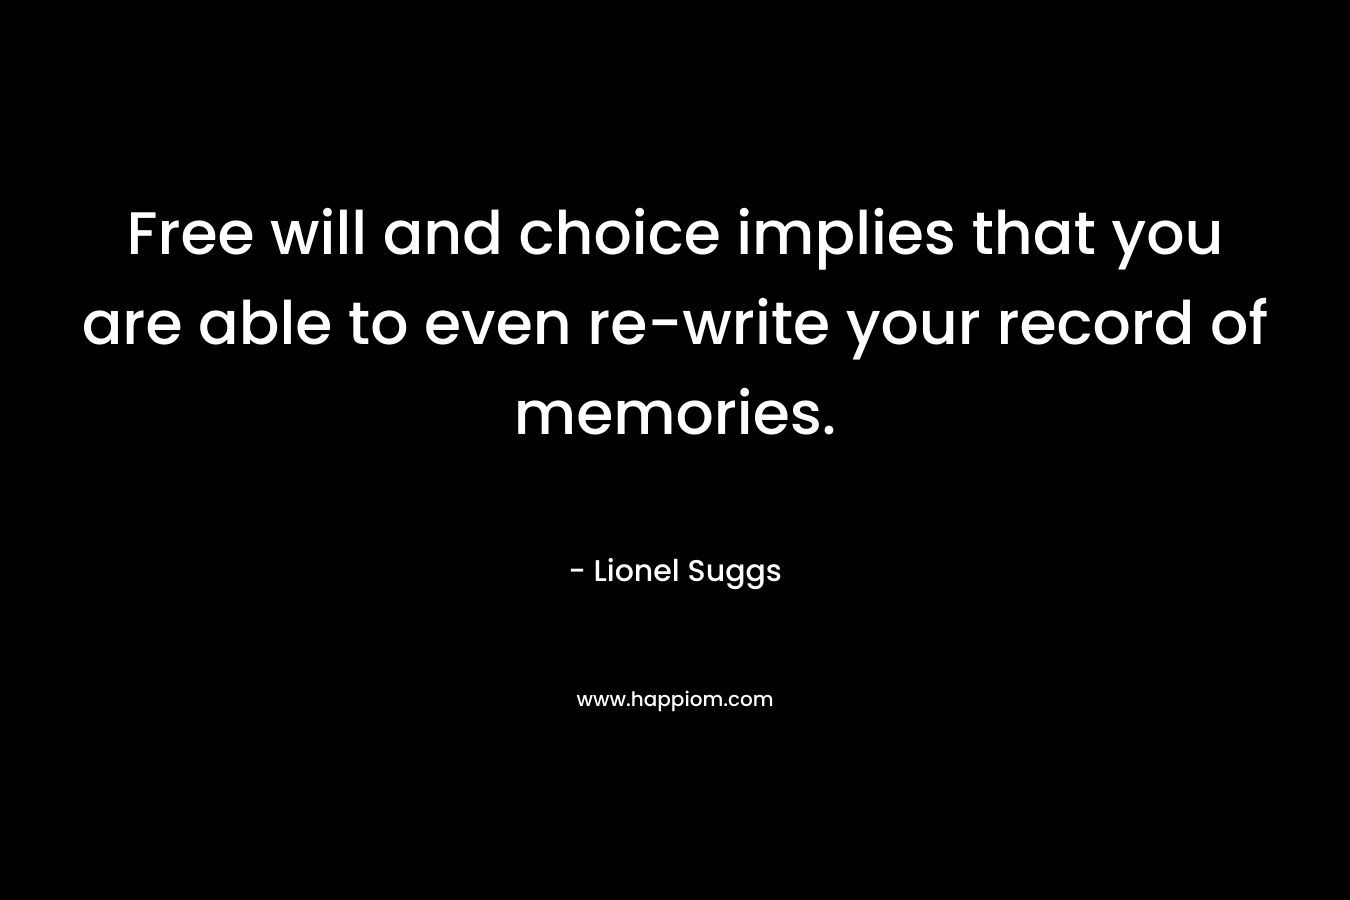 Free will and choice implies that you are able to even re-write your record of memories. – Lionel Suggs